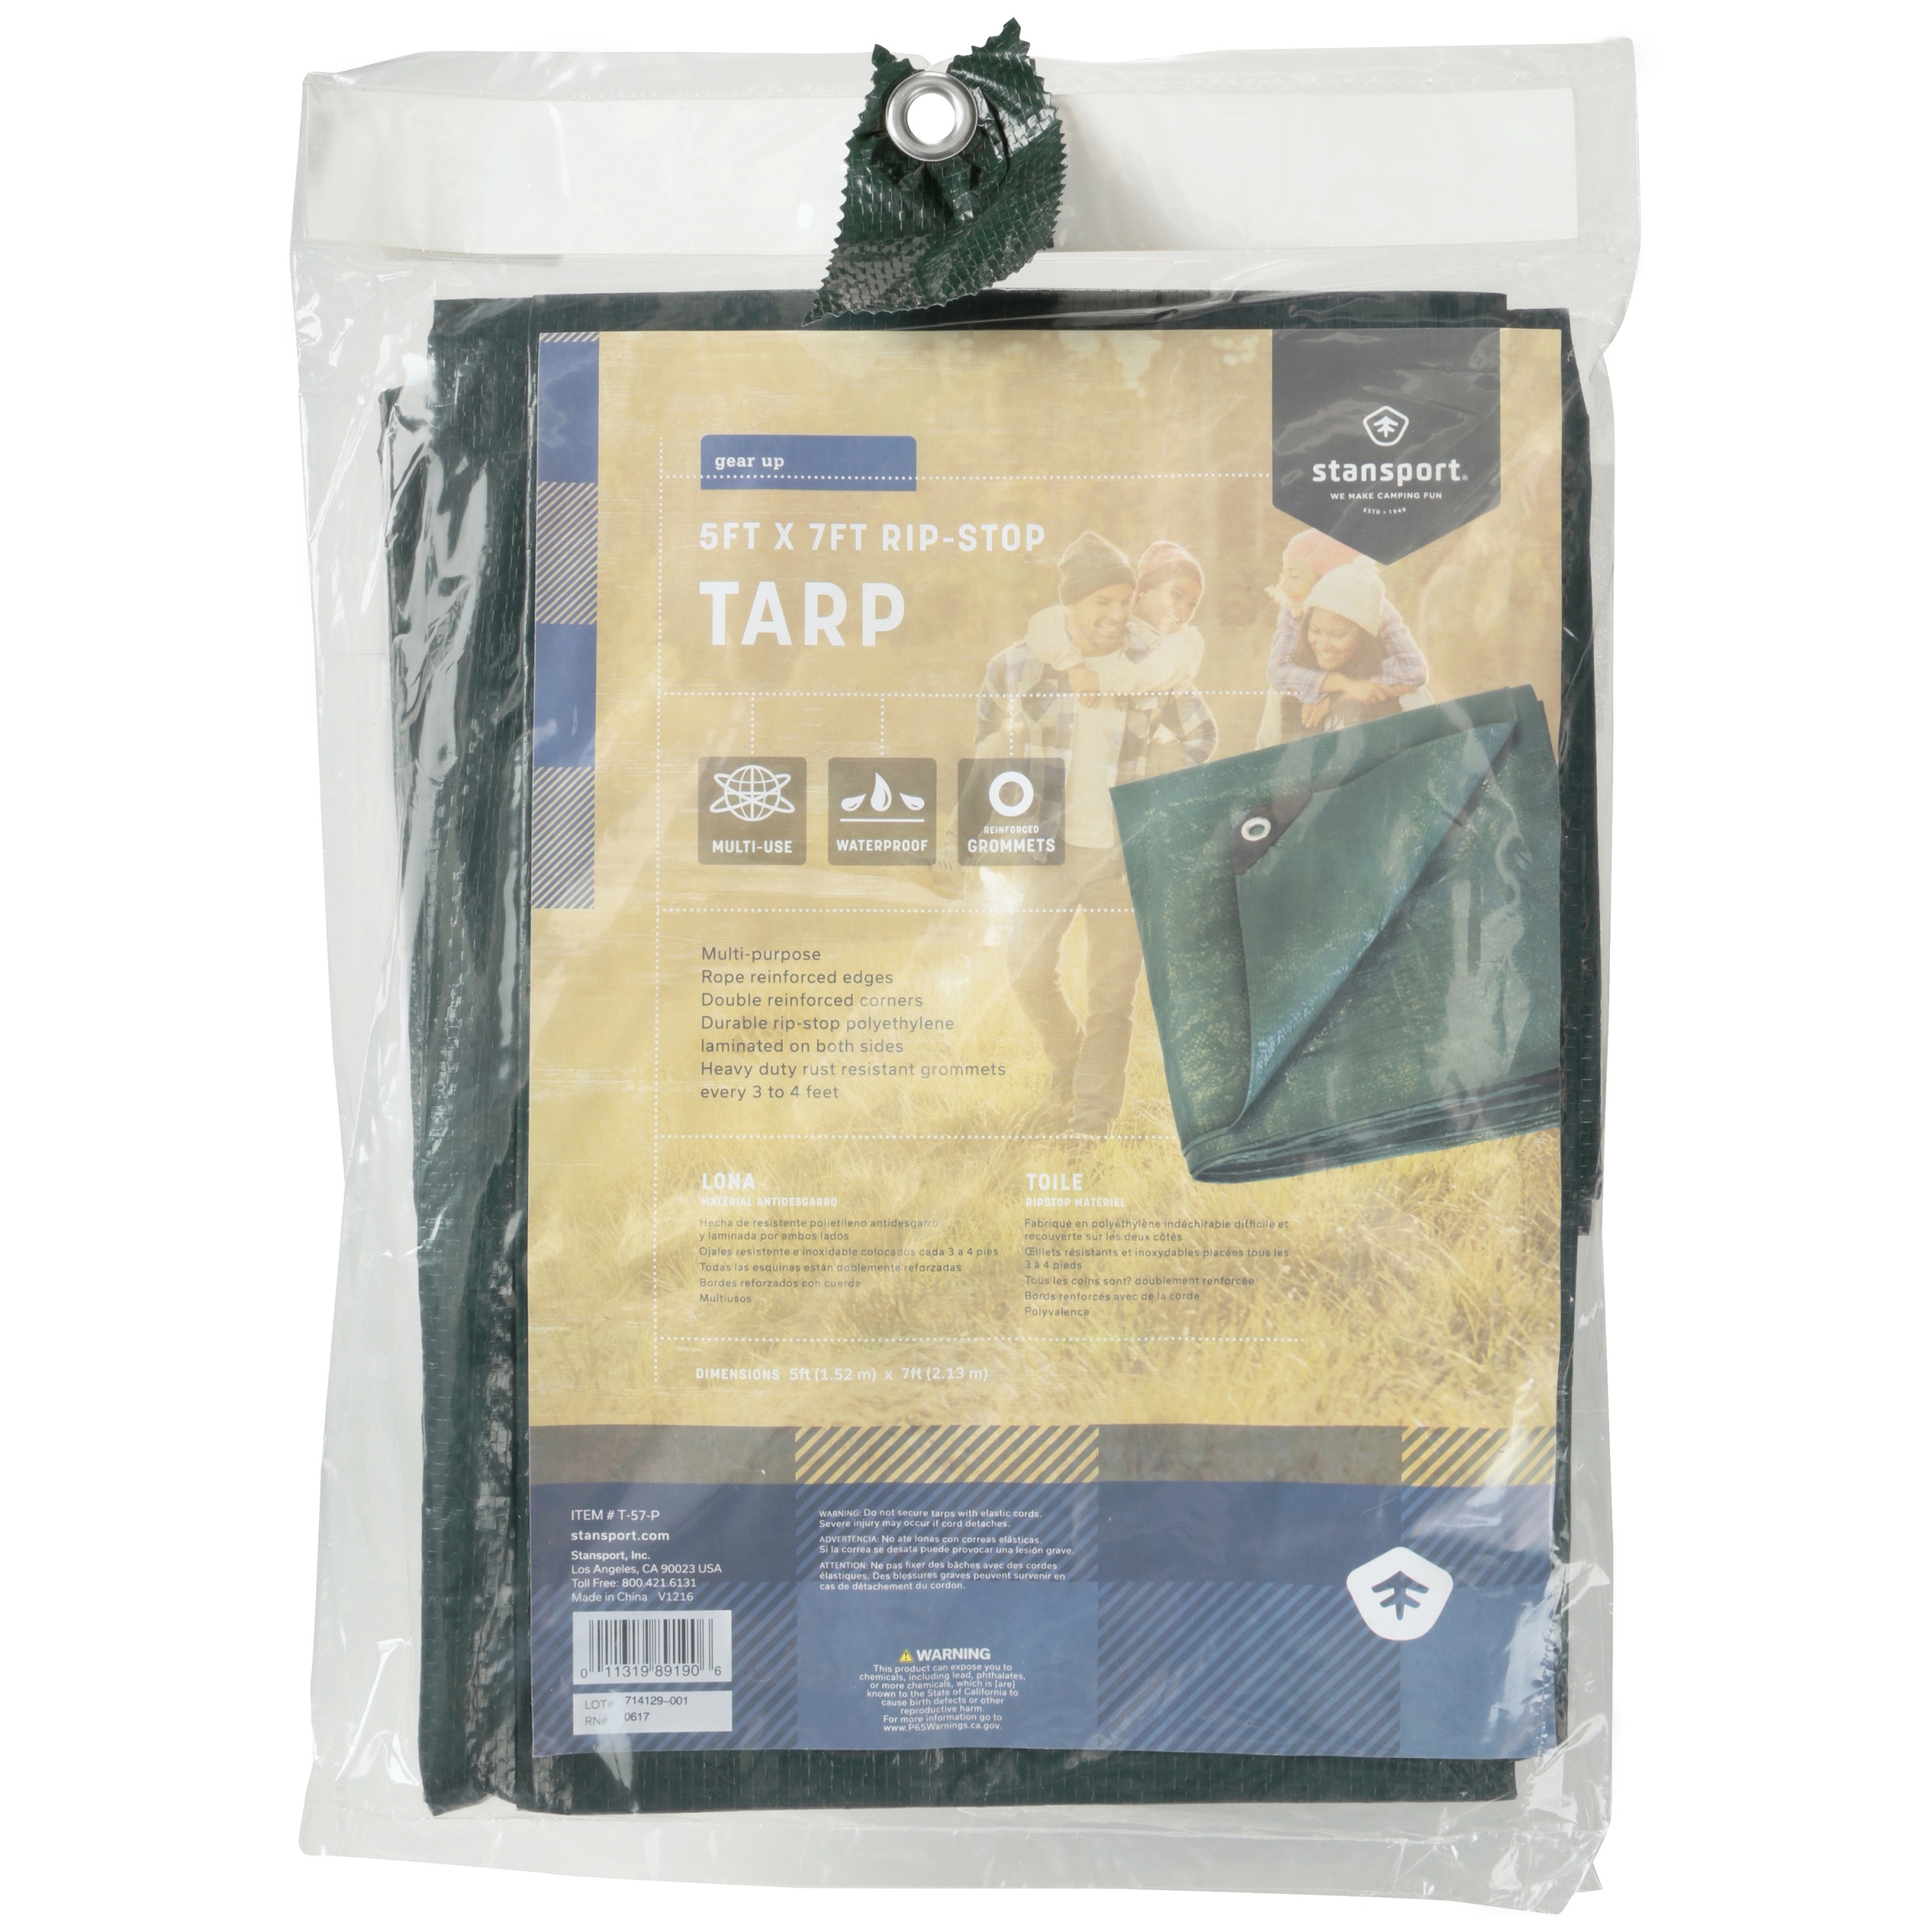 Stansport Rip Stop Tarp - 5' x 7' - Green - PDQ - image 2 of 4